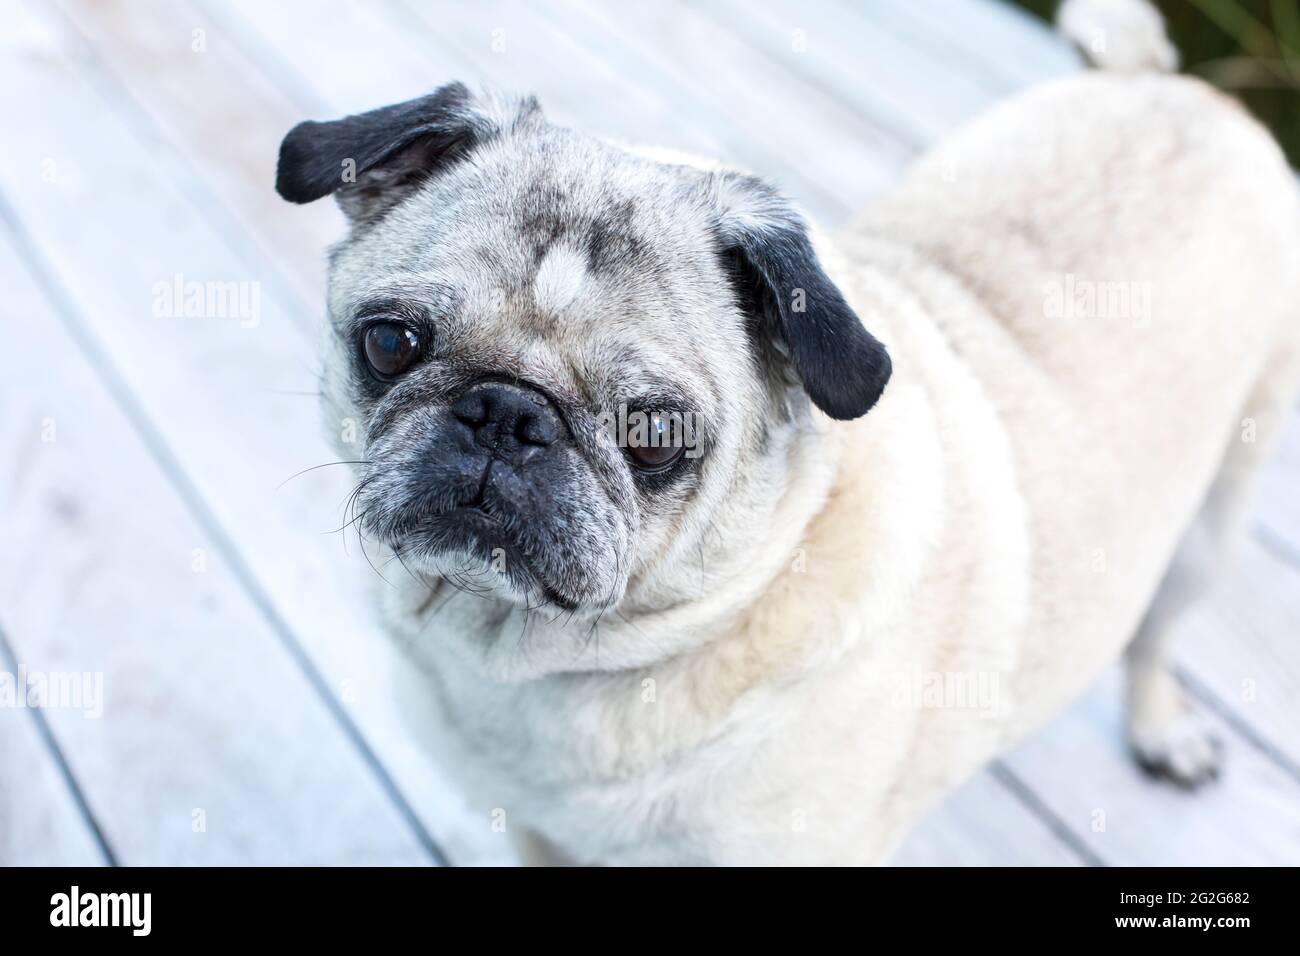 A close-up portrait of pug looking at camera with deck in background Stock Photo